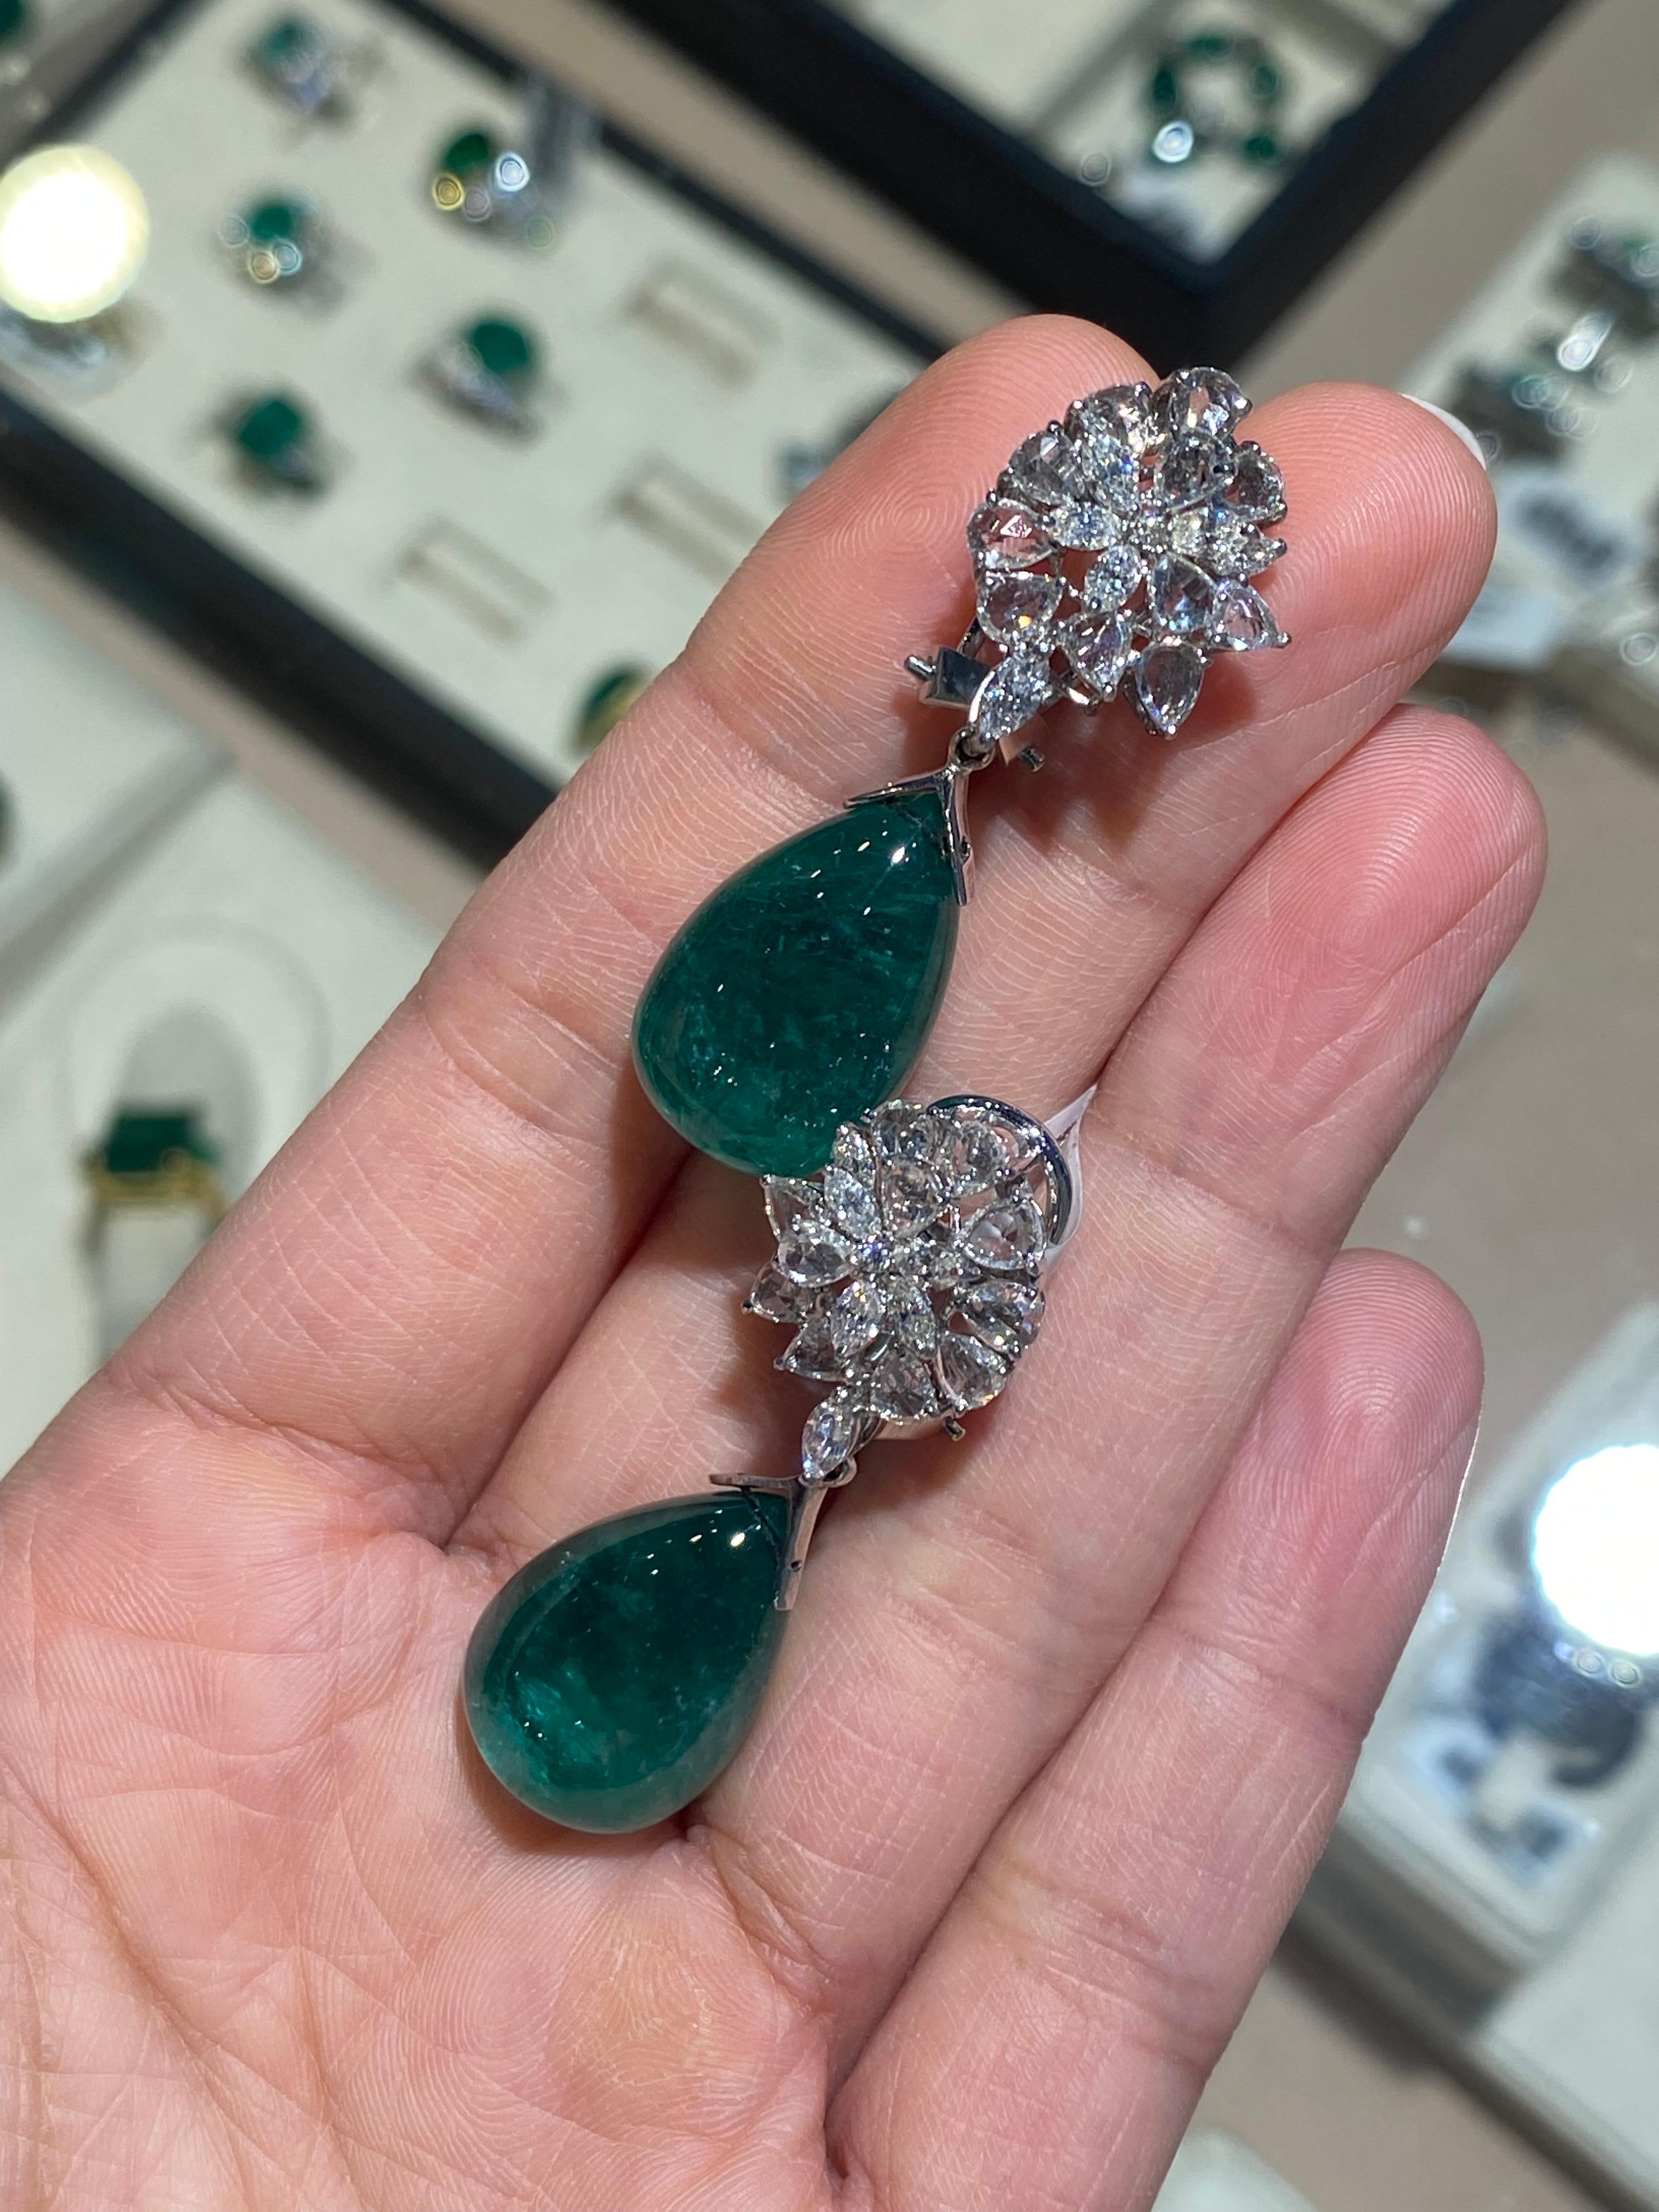 A beautiful pair of 46.1 carat natural Emerald drops earring with full cut and rose cut White Diamonds, set in 18K Gold.